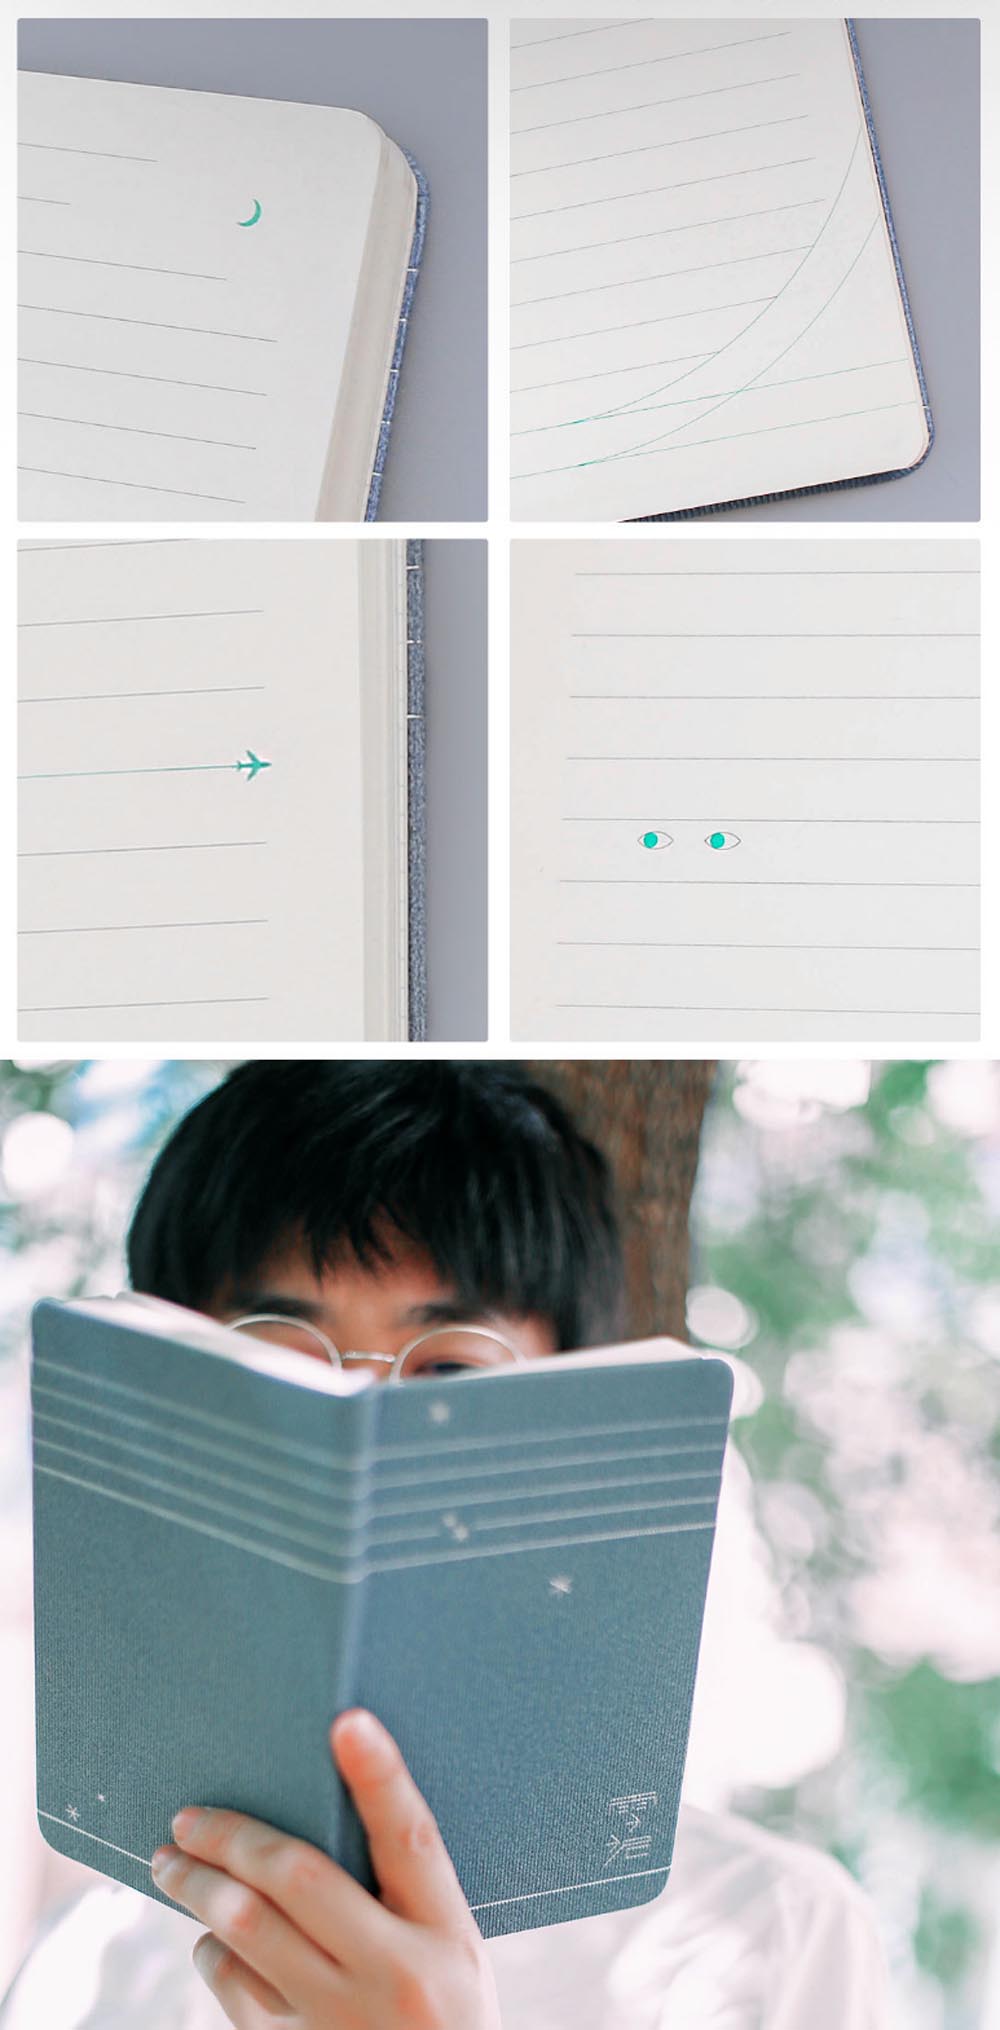 1-pcs-Xiaomi-Creative-Diary-Notebook-192-Pages-Paper-72-Pattern-195-x-118-x2-cm-Note-Book-1387886